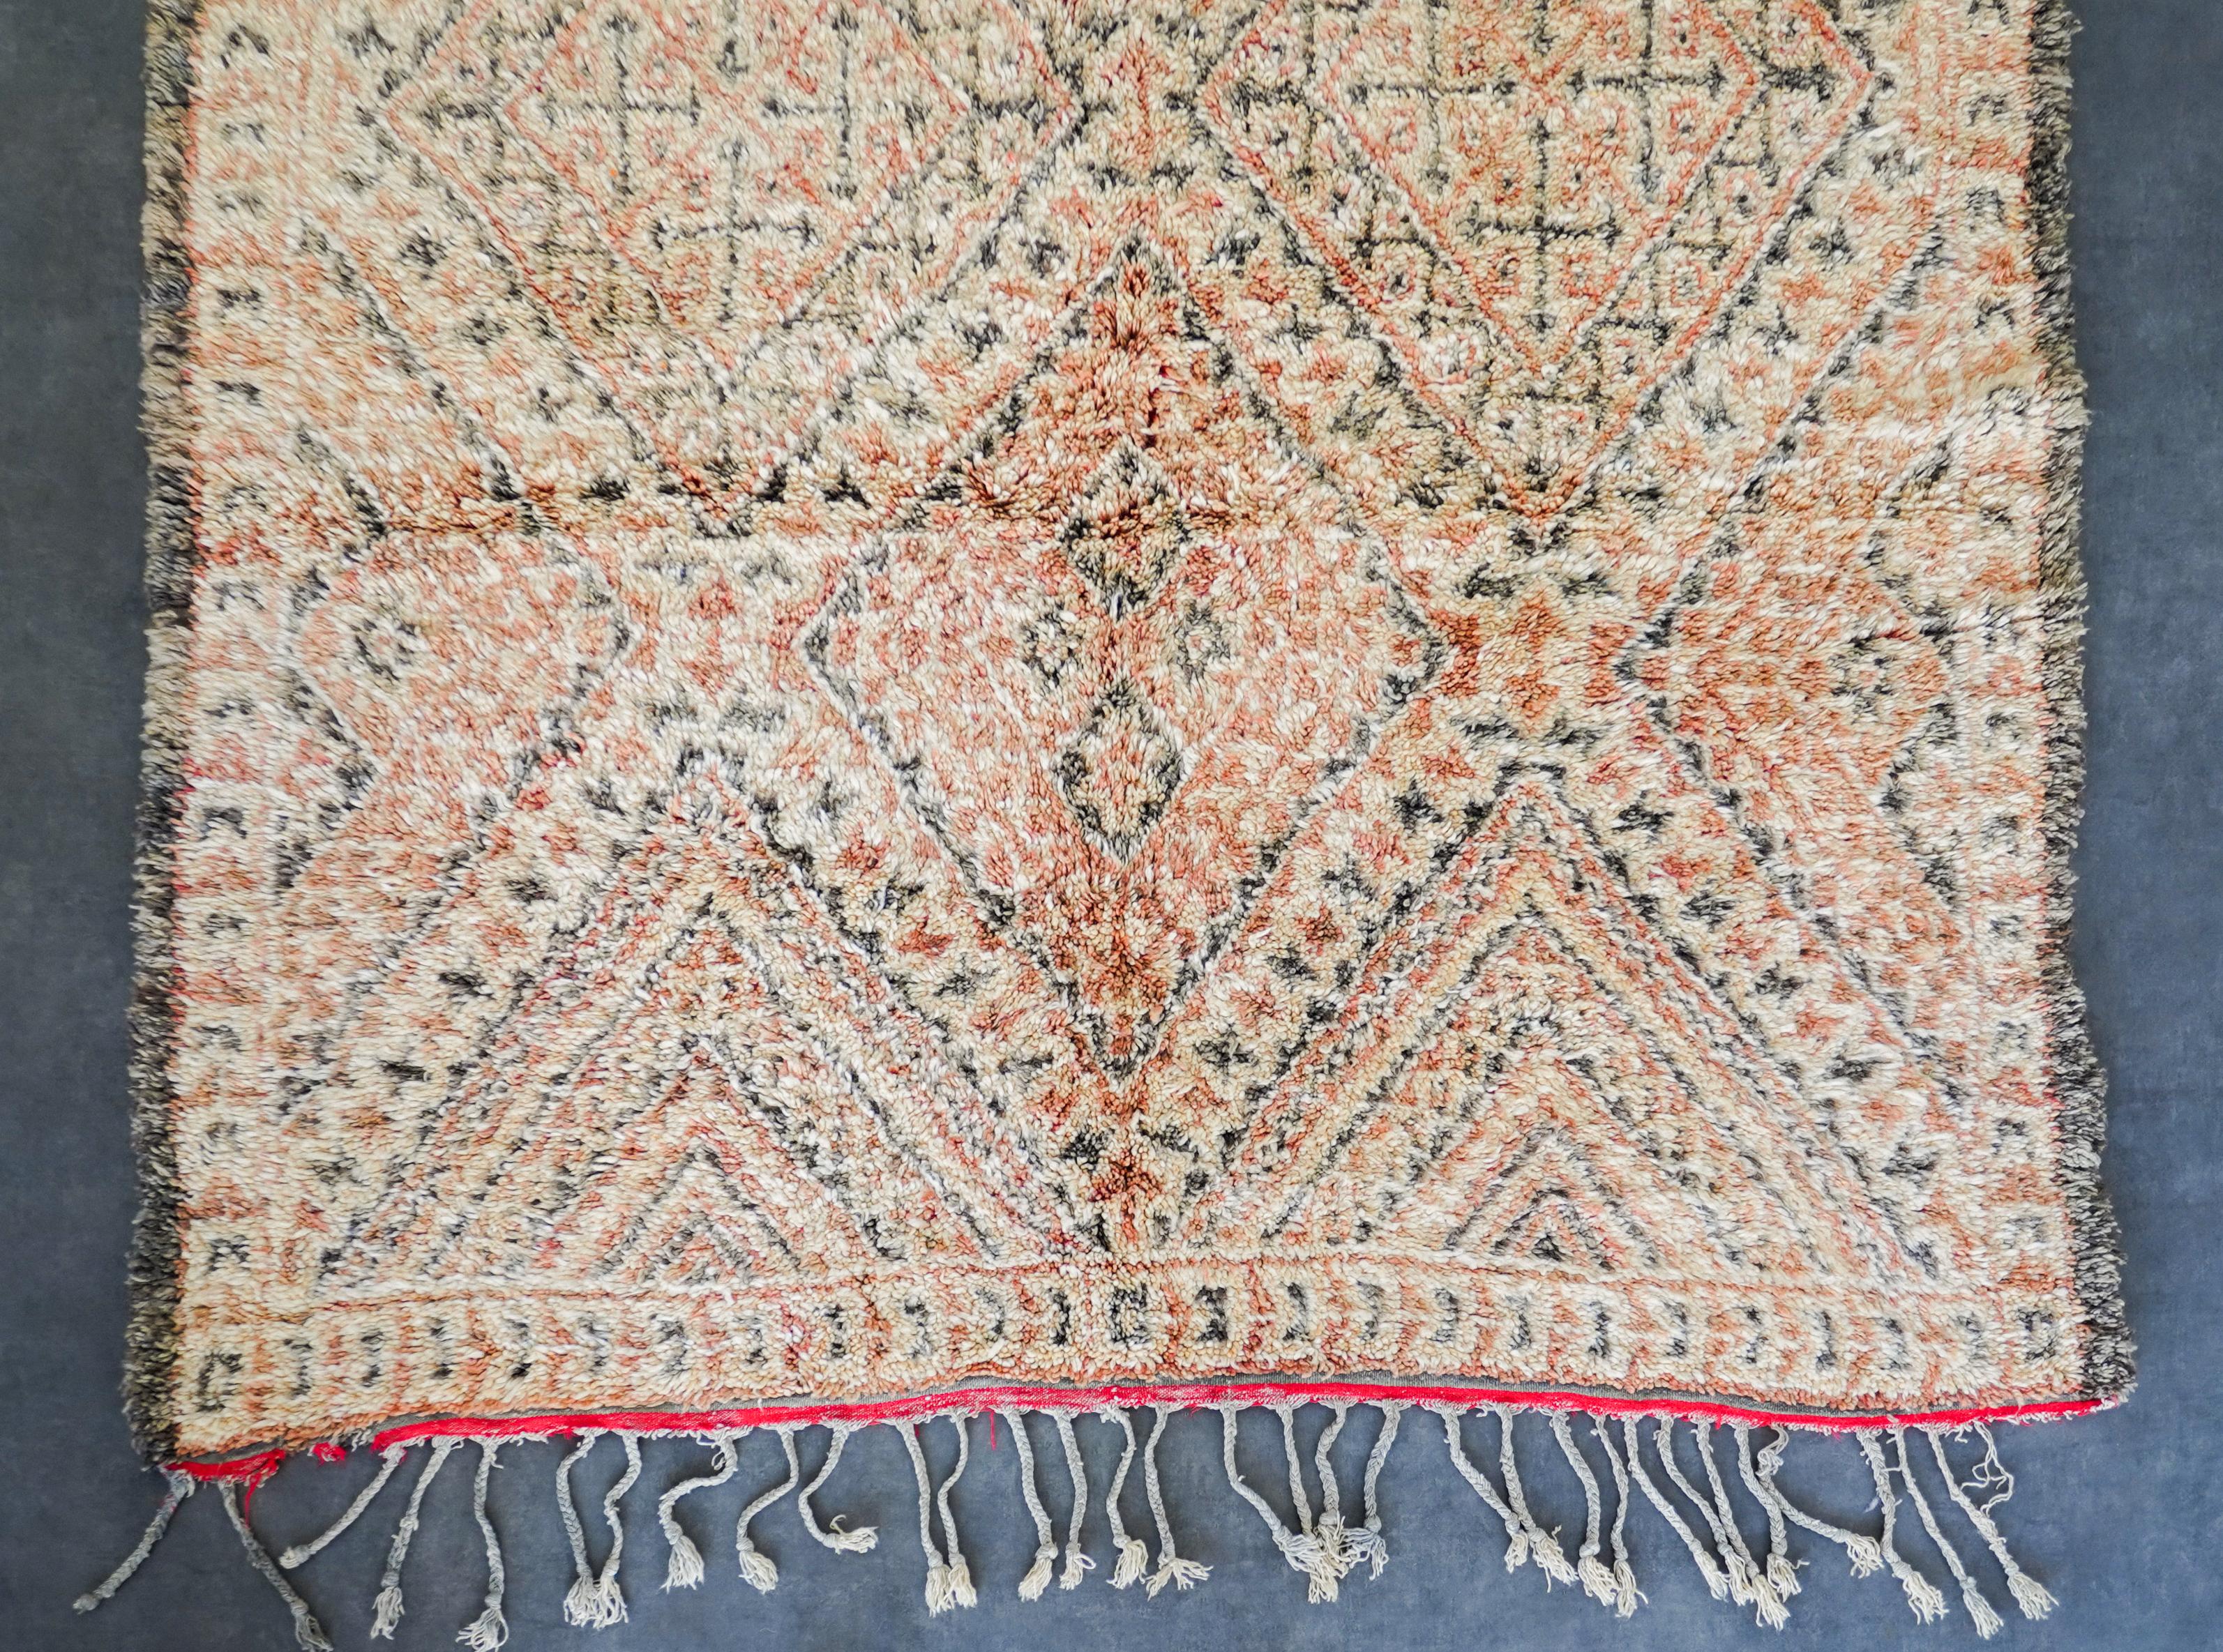 KD03 6.6x14 Ft 200x420 Cm

Uncover the rich heritage woven into our beige Moroccan vintage rug. Handmade by skilled artisans using time-tested techniques, each Berber rug is a unique narrative, echoing the cultural tapestry of Morocco. With